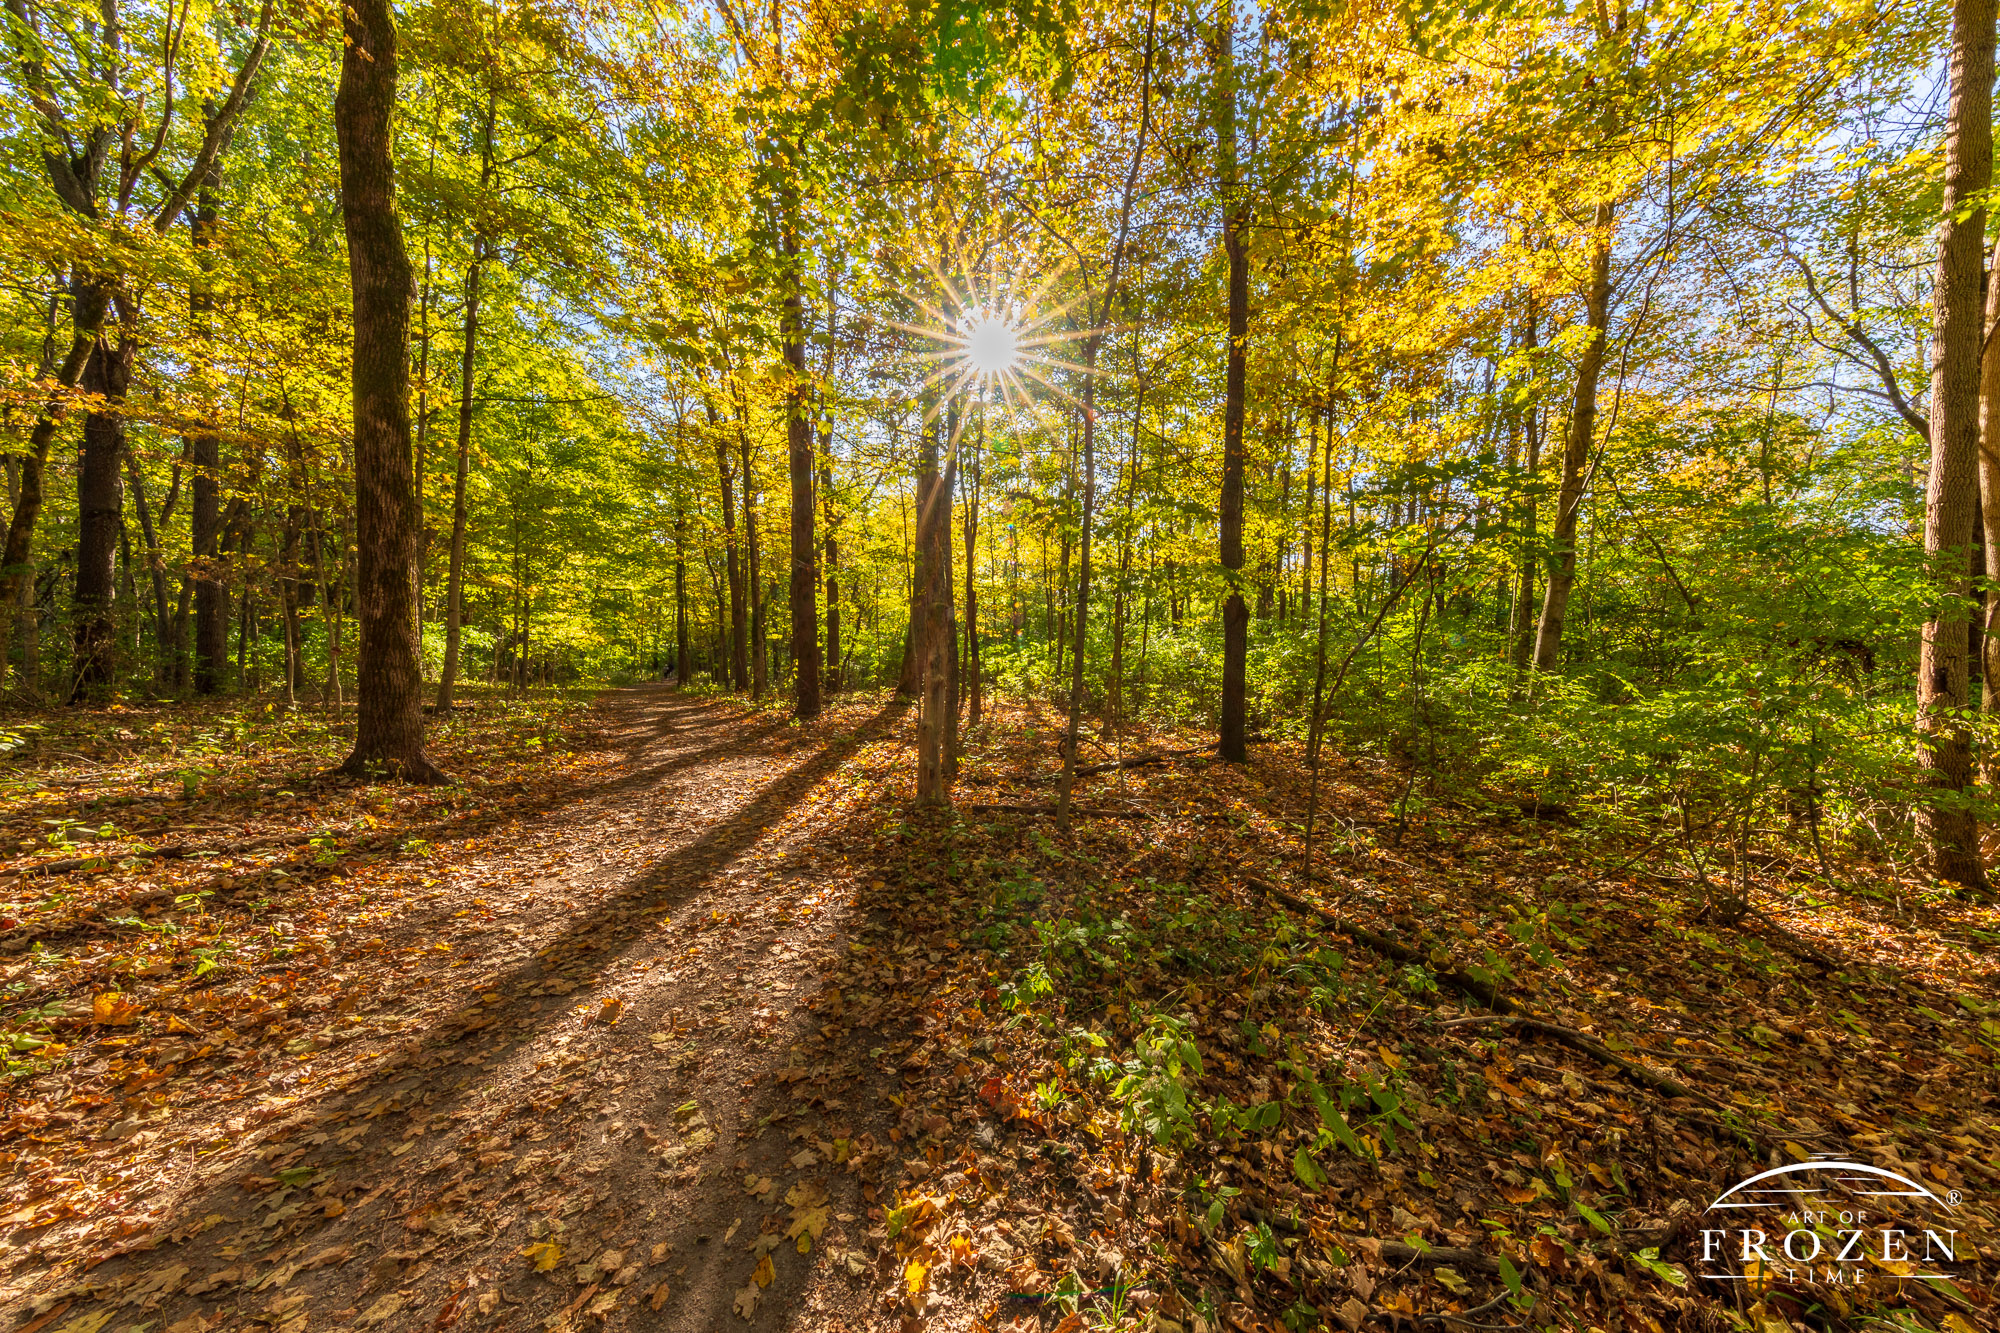 The warm autumn light illuminating the trail during an evening walk in Sugarcreek MetroPark